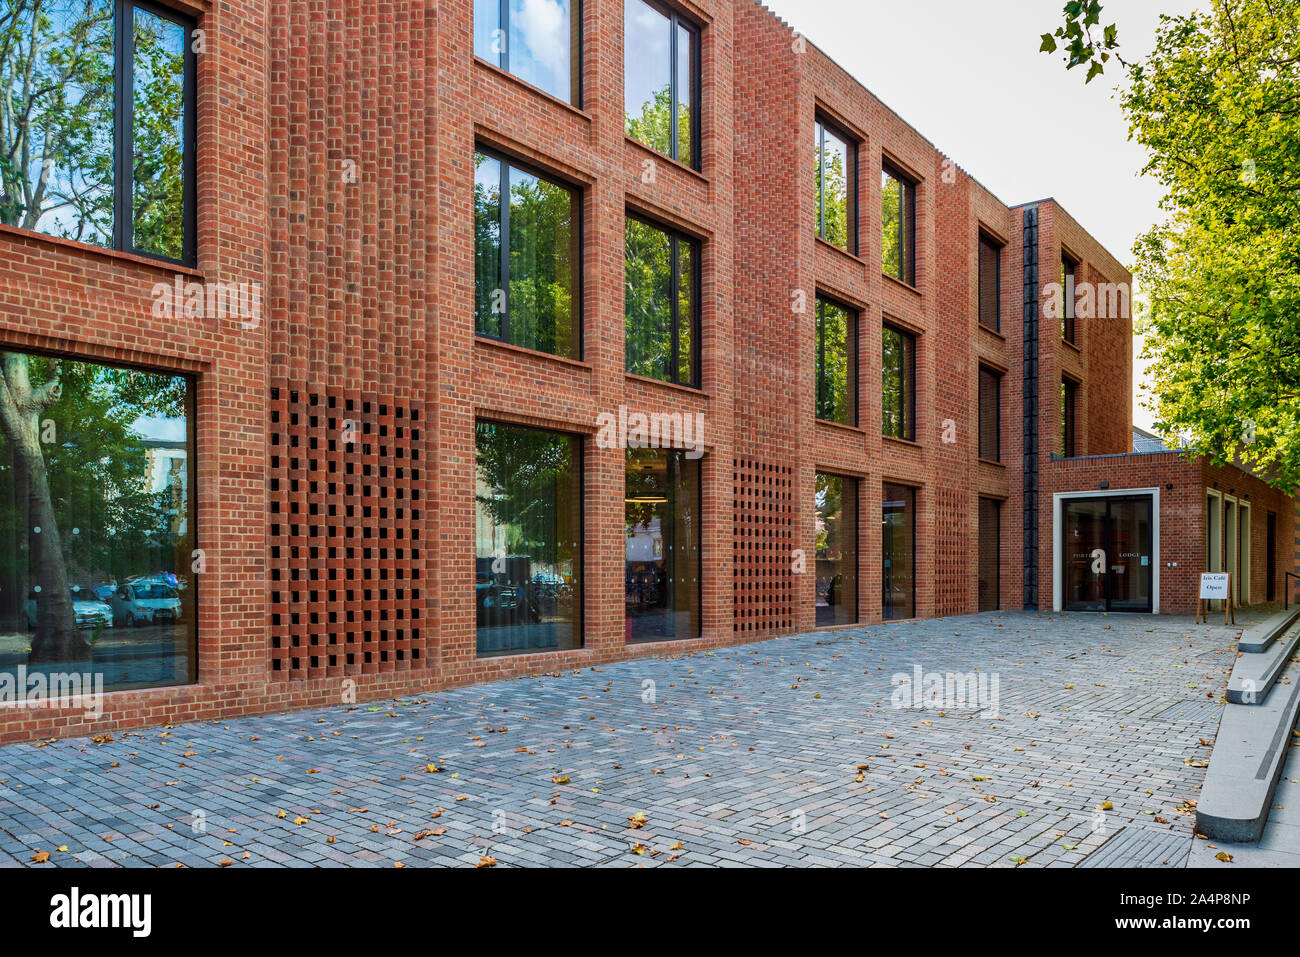 The Dorothy Garrod building Newnham College Cambridge University - Architects Walters & Cohen 2019 - RIBA East Building of the Year 2019 Stock Photo